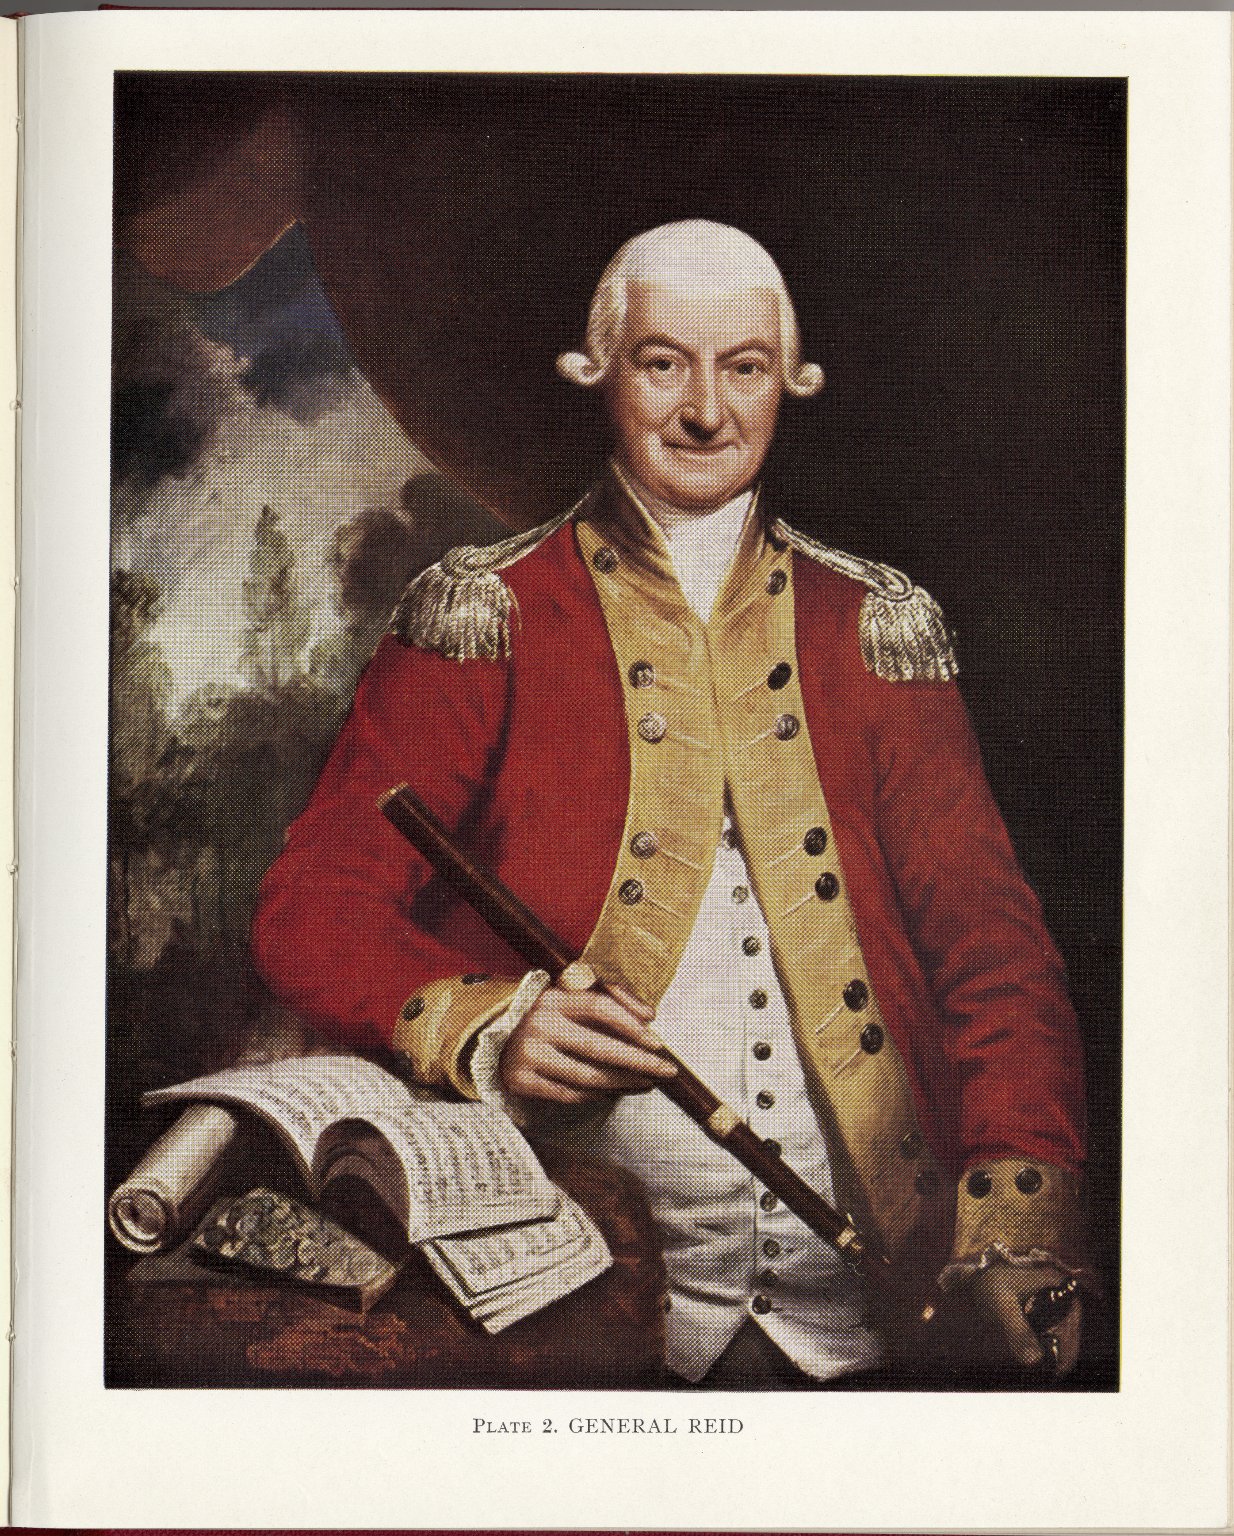 A painting of General John Reid, in uniform, holding a baroque flute and leaning on an open music book.